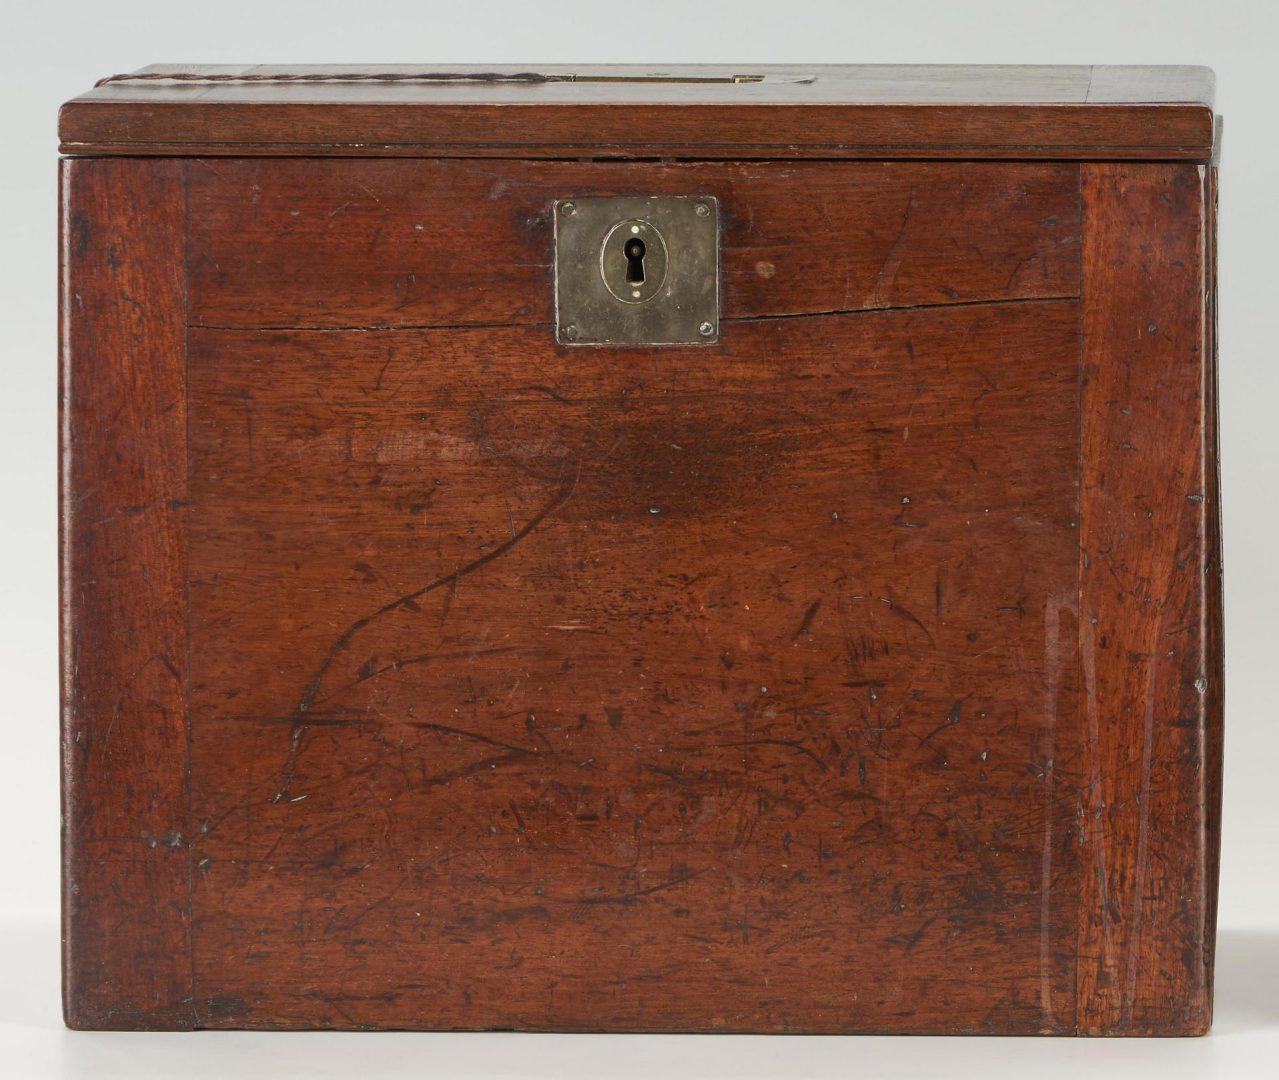 Lot 286: 2 Antique Collector's or Watchmaker's Boxes